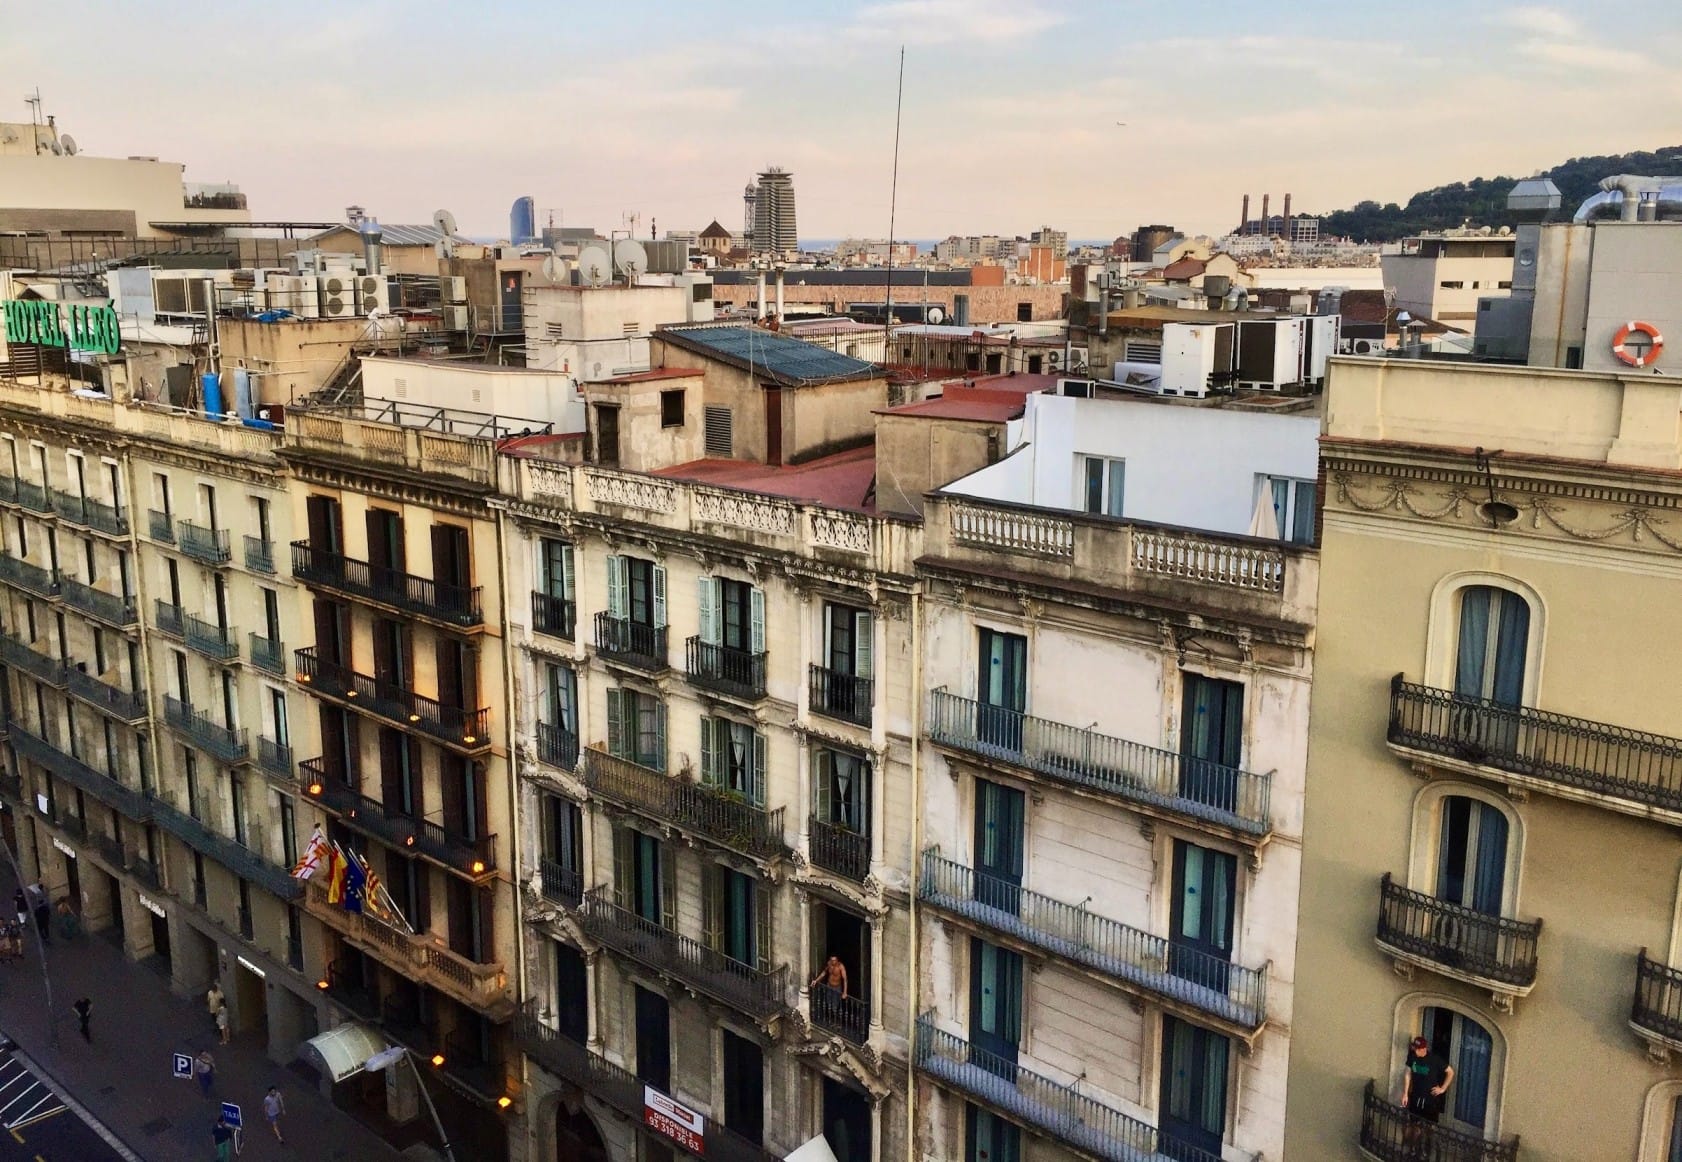 Rooftops and old buidlings, Barcelona Spain